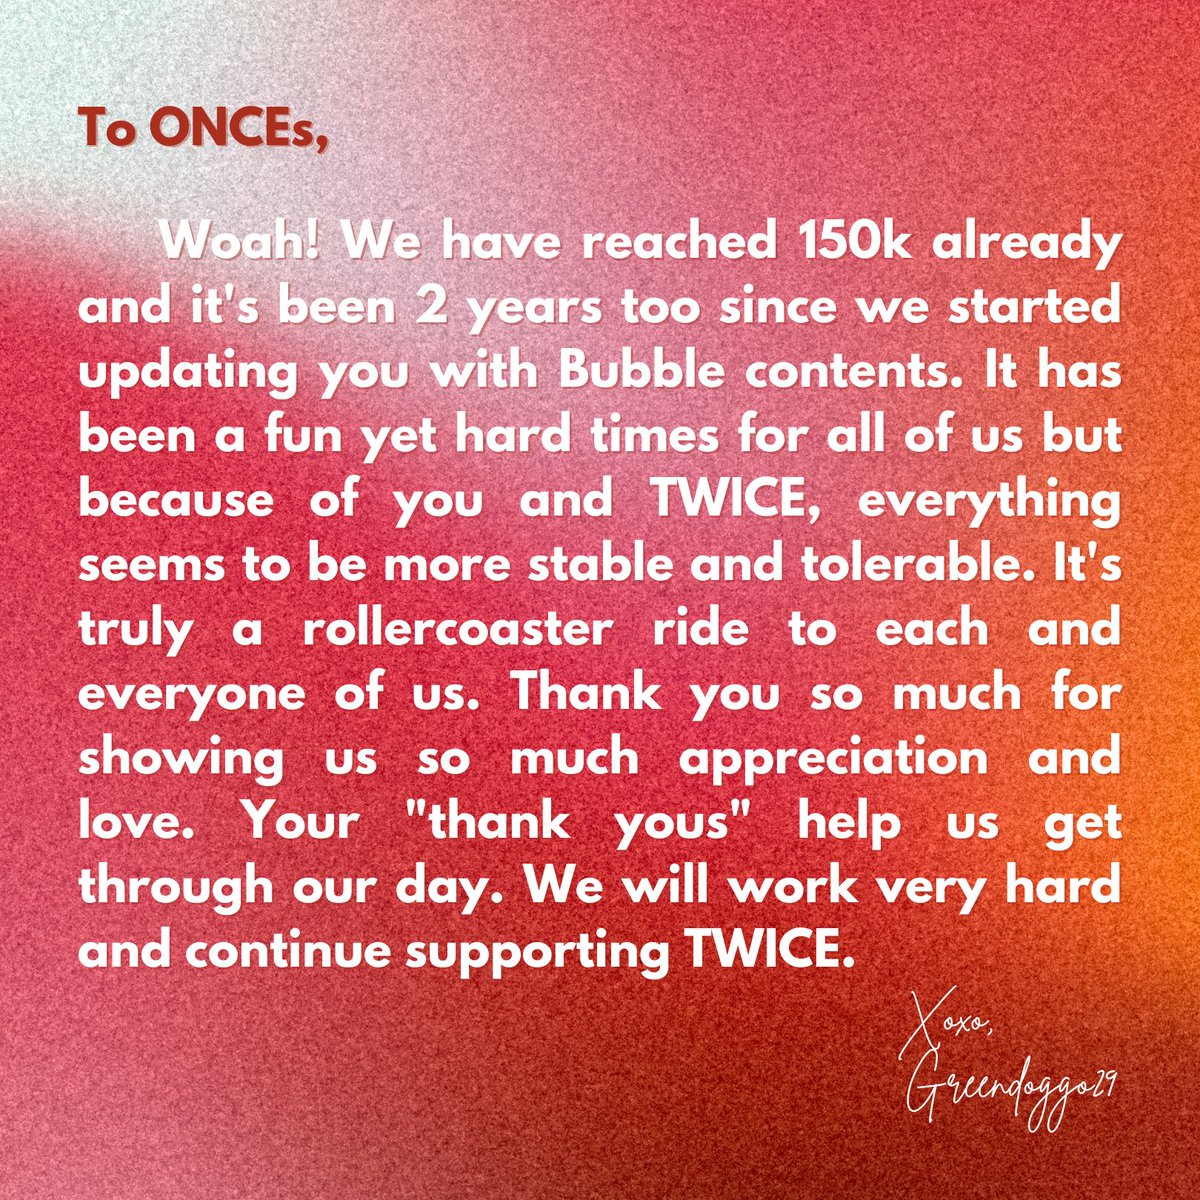 Wow! A double achievement 🥺💖 Thank you so much for showing interest to us. Please continue to show us especially TWICE lots of love and support. We love you~ 💓 여러분들 정말 감사합니다ㅠㅠ Support us in: buymeacoffee.com/OT9TRANS